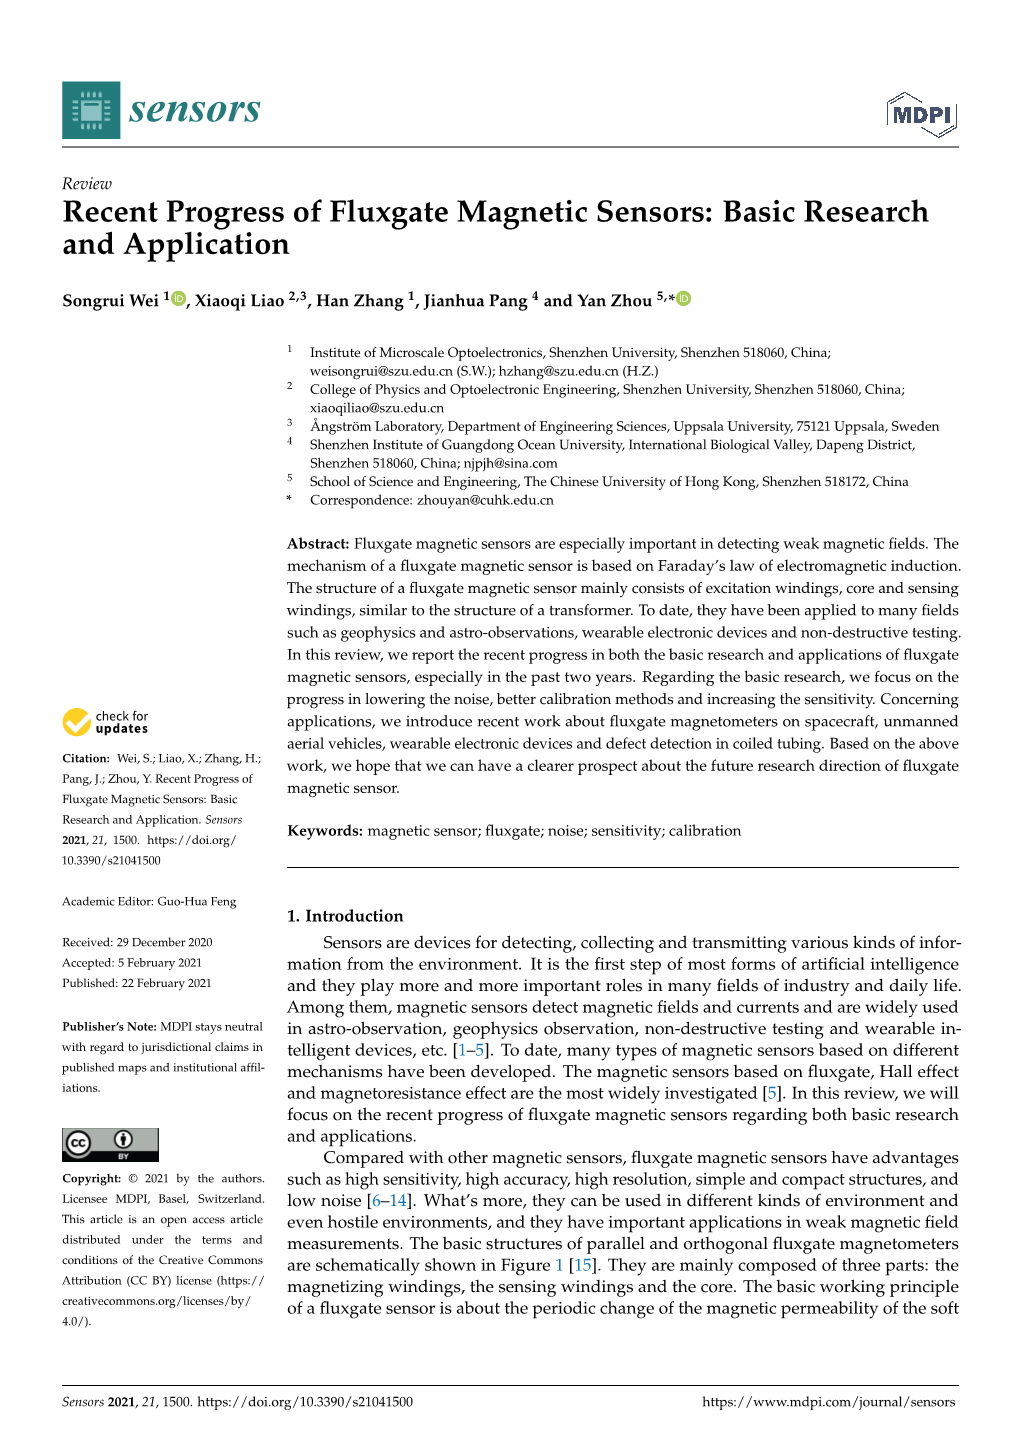 Recent Progress of Fluxgate Magnetic Sensors: Basic Research and Application